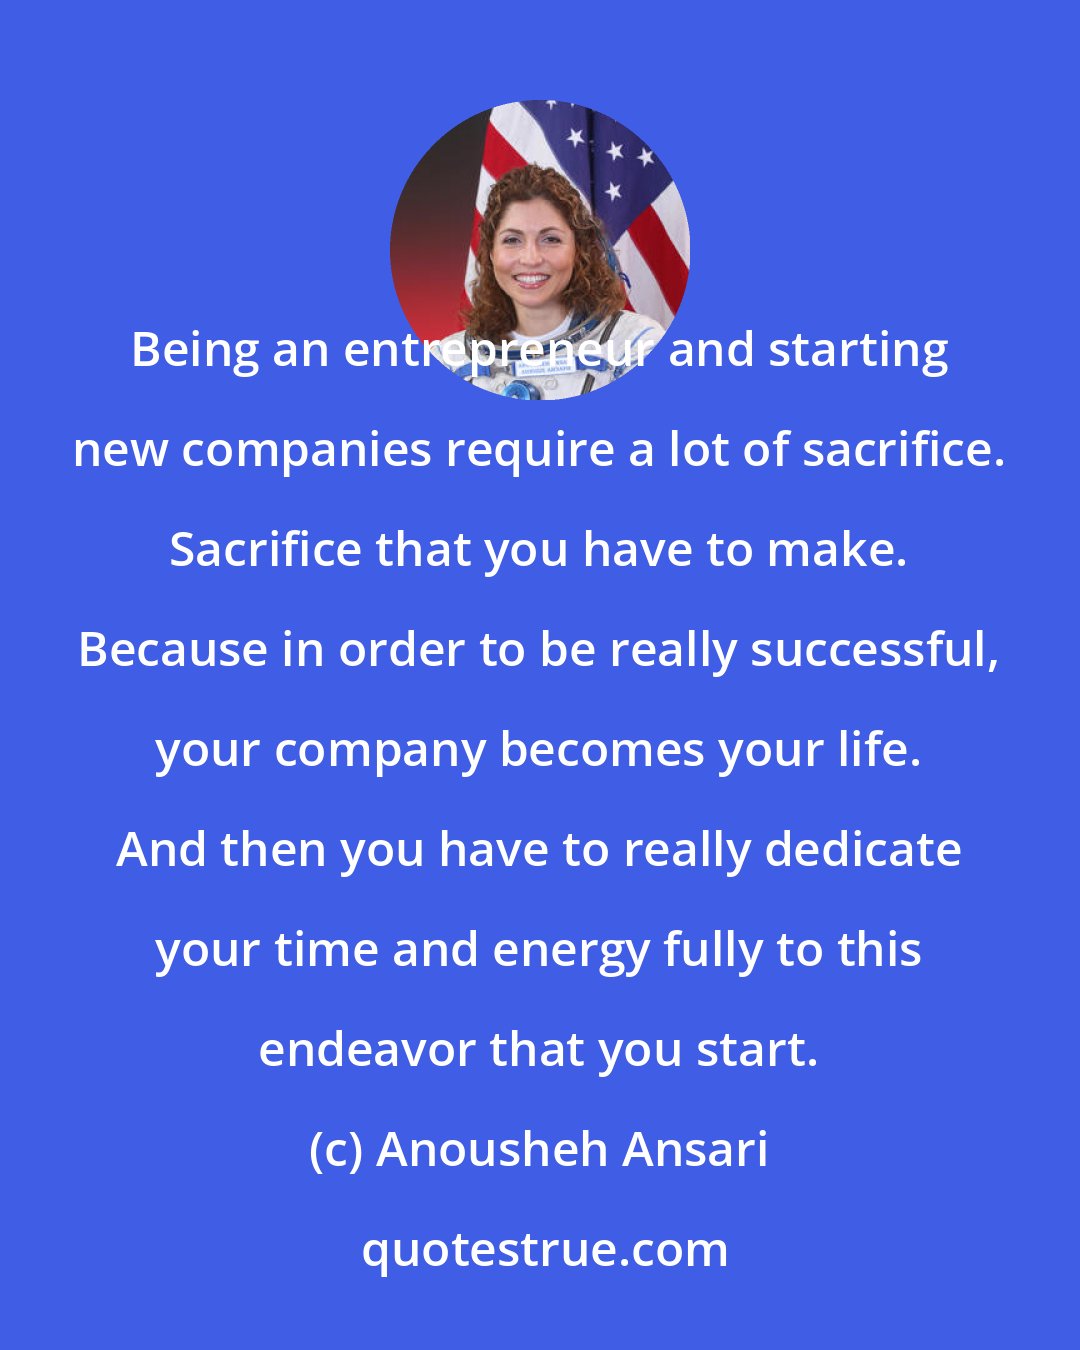 Anousheh Ansari: Being an entrepreneur and starting new companies require a lot of sacrifice. Sacrifice that you have to make. Because in order to be really successful, your company becomes your life. And then you have to really dedicate your time and energy fully to this endeavor that you start.